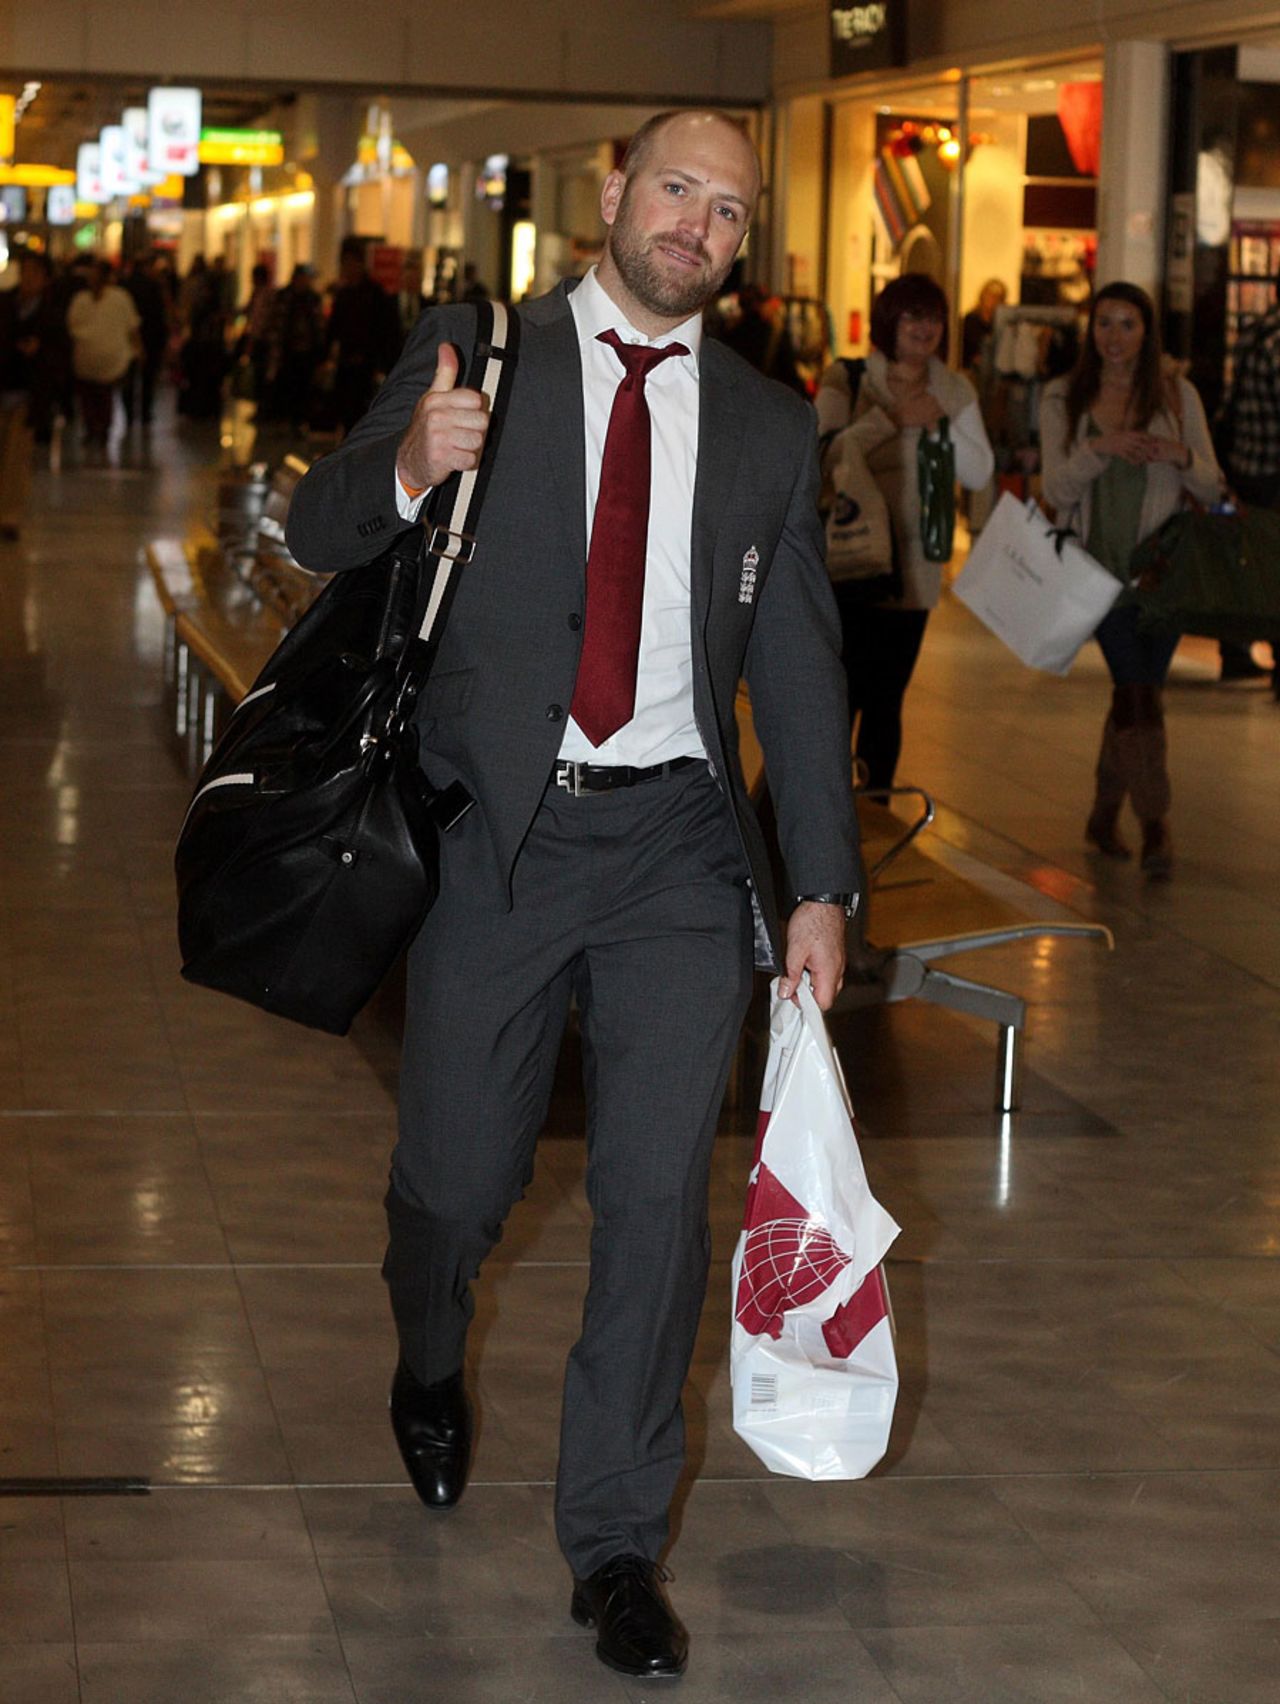 Matt Prior gives a thumbs up as he heads through the airport, Heathrow, January 2, 2012